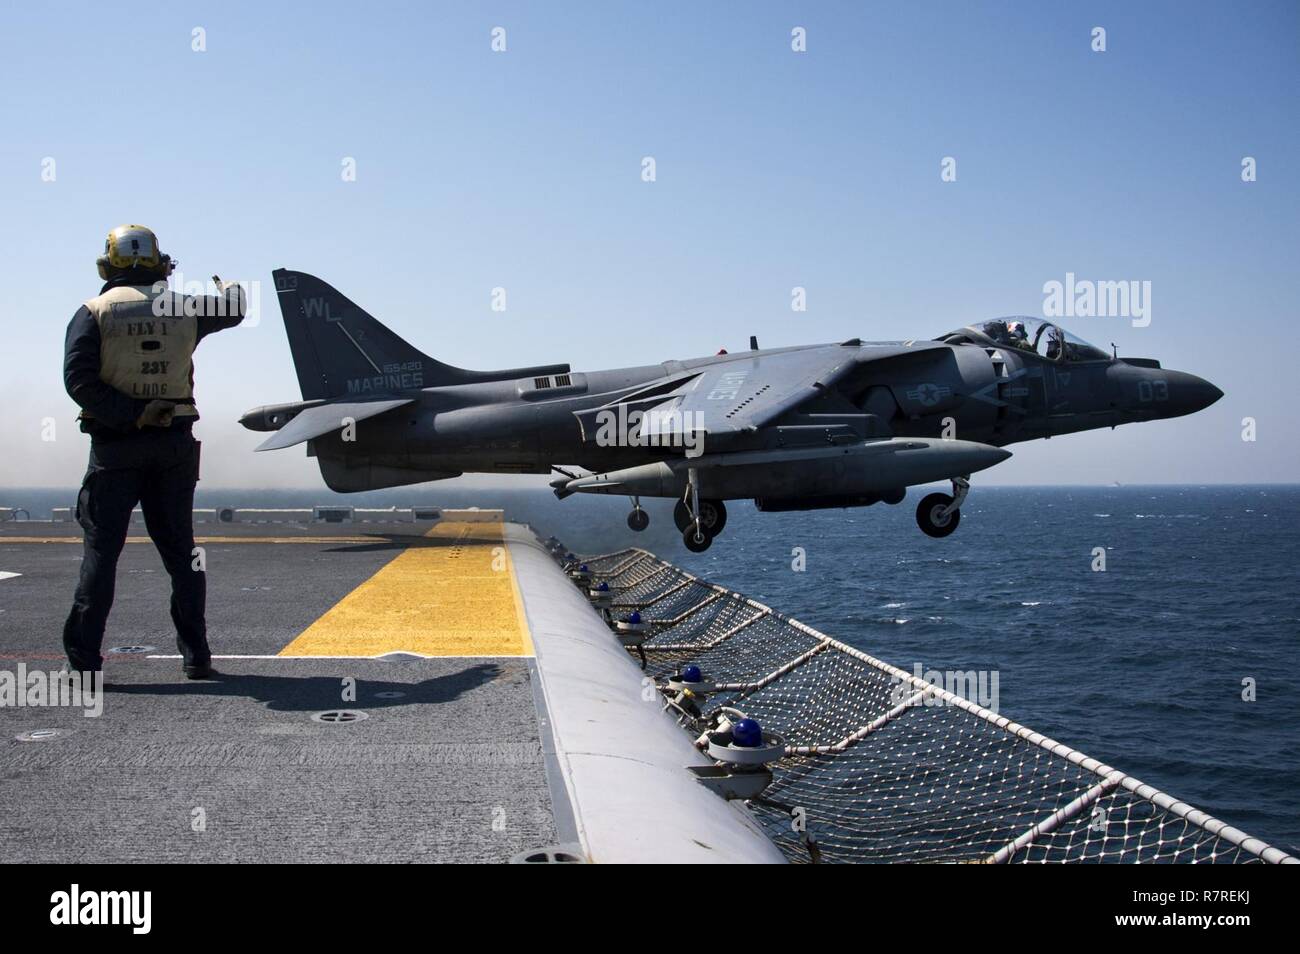 EAST CHINA SEA (April 3, 2017) Aviation Boatswain's Mate (Handling) Airman Matthew Titus, from St. Louis, Mo., directs the launch of an AV-8B Harrier, assigned to the Tomcats of Marine Attack Squadron (VMA) 311, from the flight deck of the amphibious assault ship USS Bonhomme Richard (LHD 6). Bonhomme Richard, flagship of the Bonhomme Richard Expeditionary Strike Group, with embarked 31st Marine Expeditionary Unit, is on a routine patrol, operating in the Indo-Asia-Pacific region to enhance warfighting readiness and posture forward as a ready-response force for any type of contingency. Stock Photo